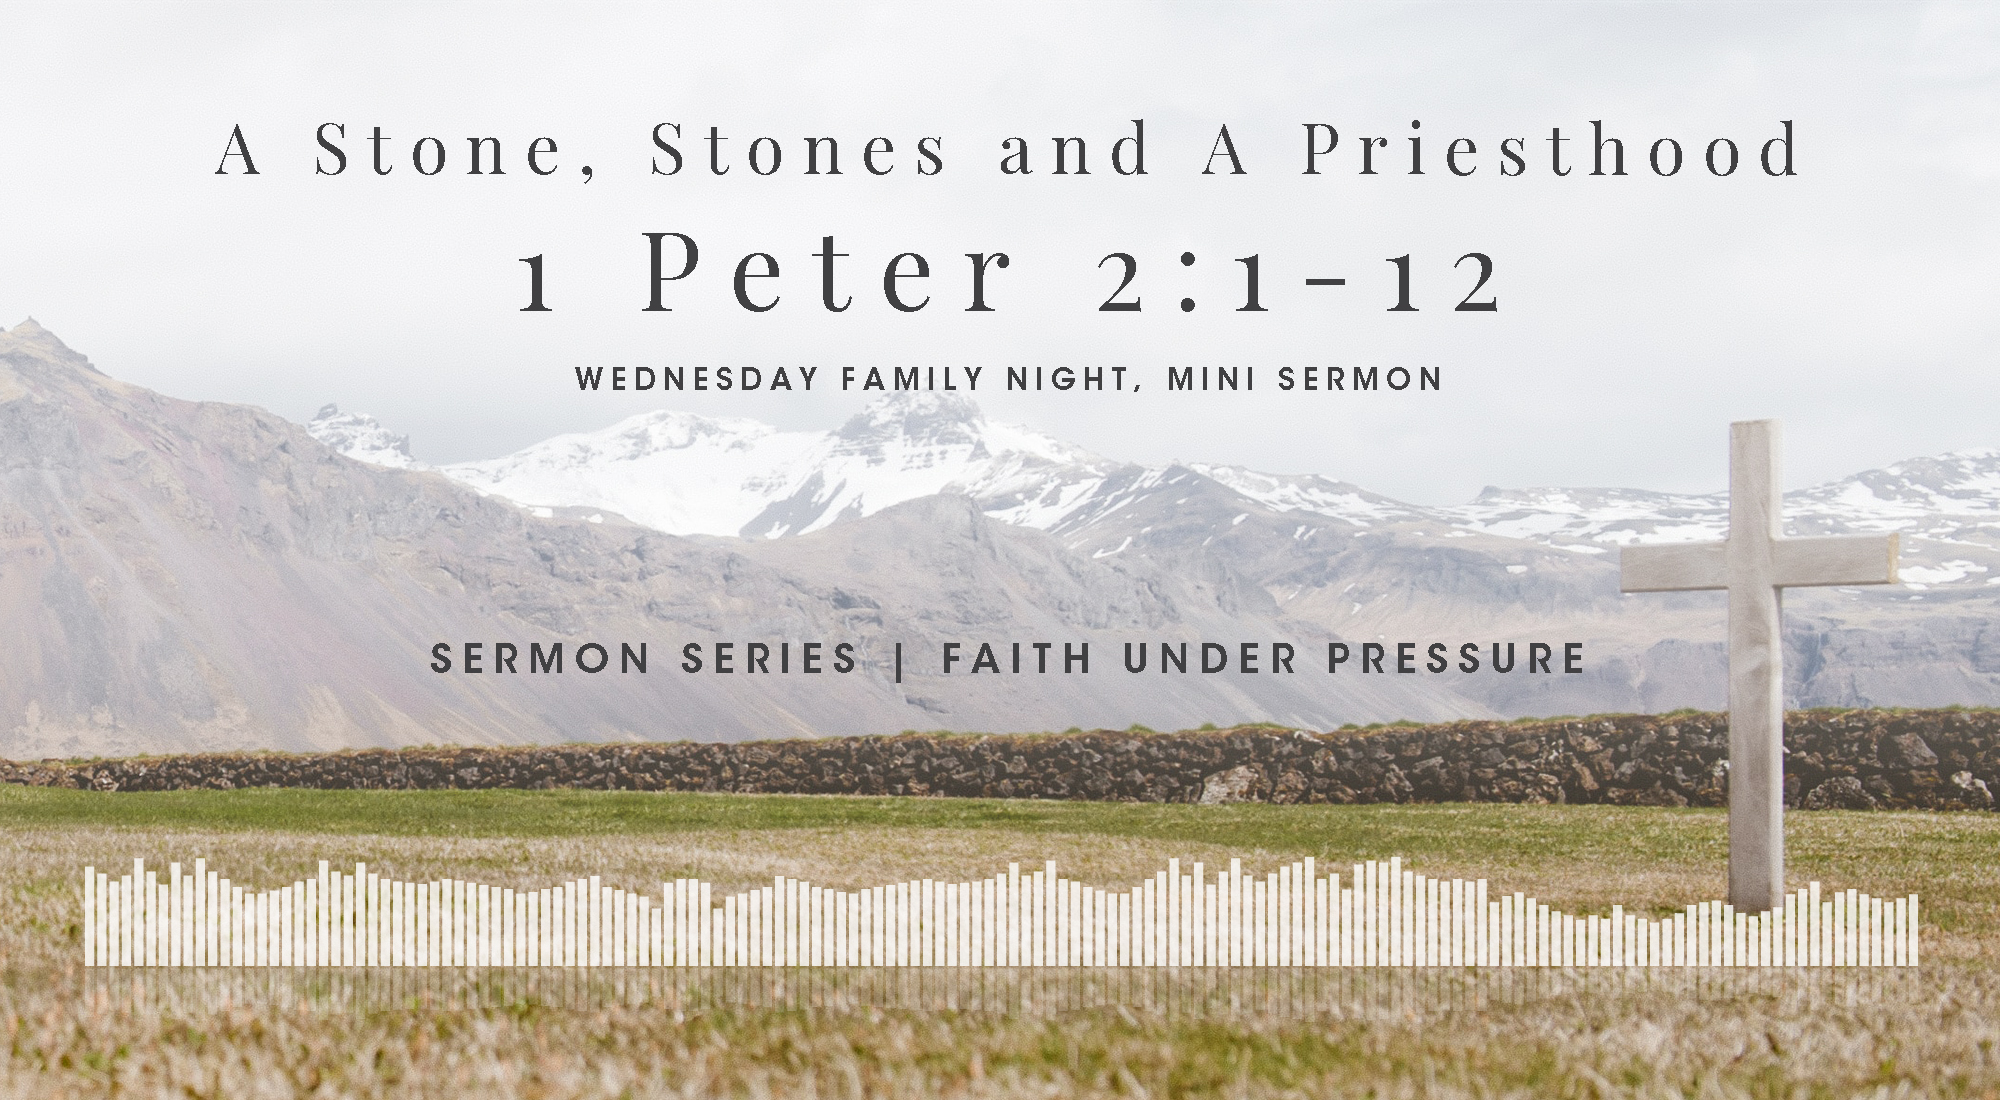 A Stone, Stones and A Priesthood - A Mini Bible Study in 1 Peter 2:1-12, From Our Faith Under Pressure Sermon Series, Wyandotte County Christian Church Wednesday Family Night